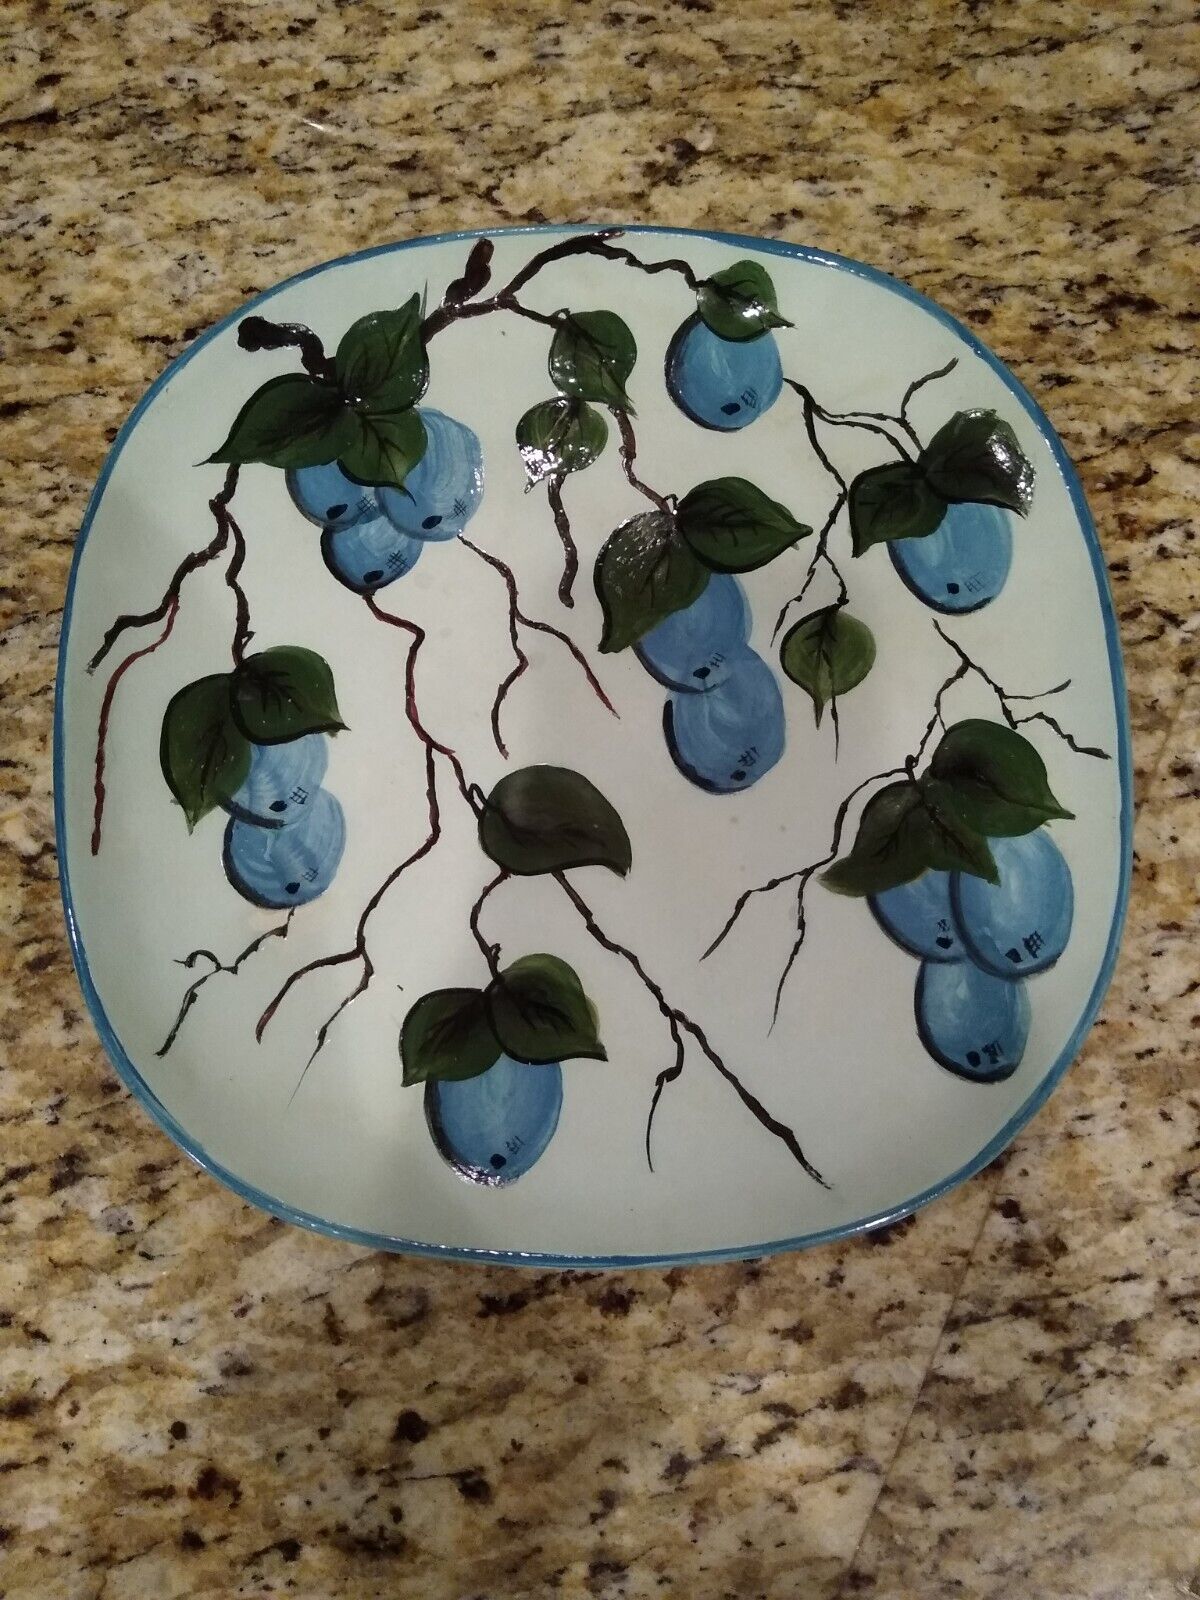 Vintage Art Plate Decorative Plate Blueberry Plate Hand Painted OOAK 10.5”